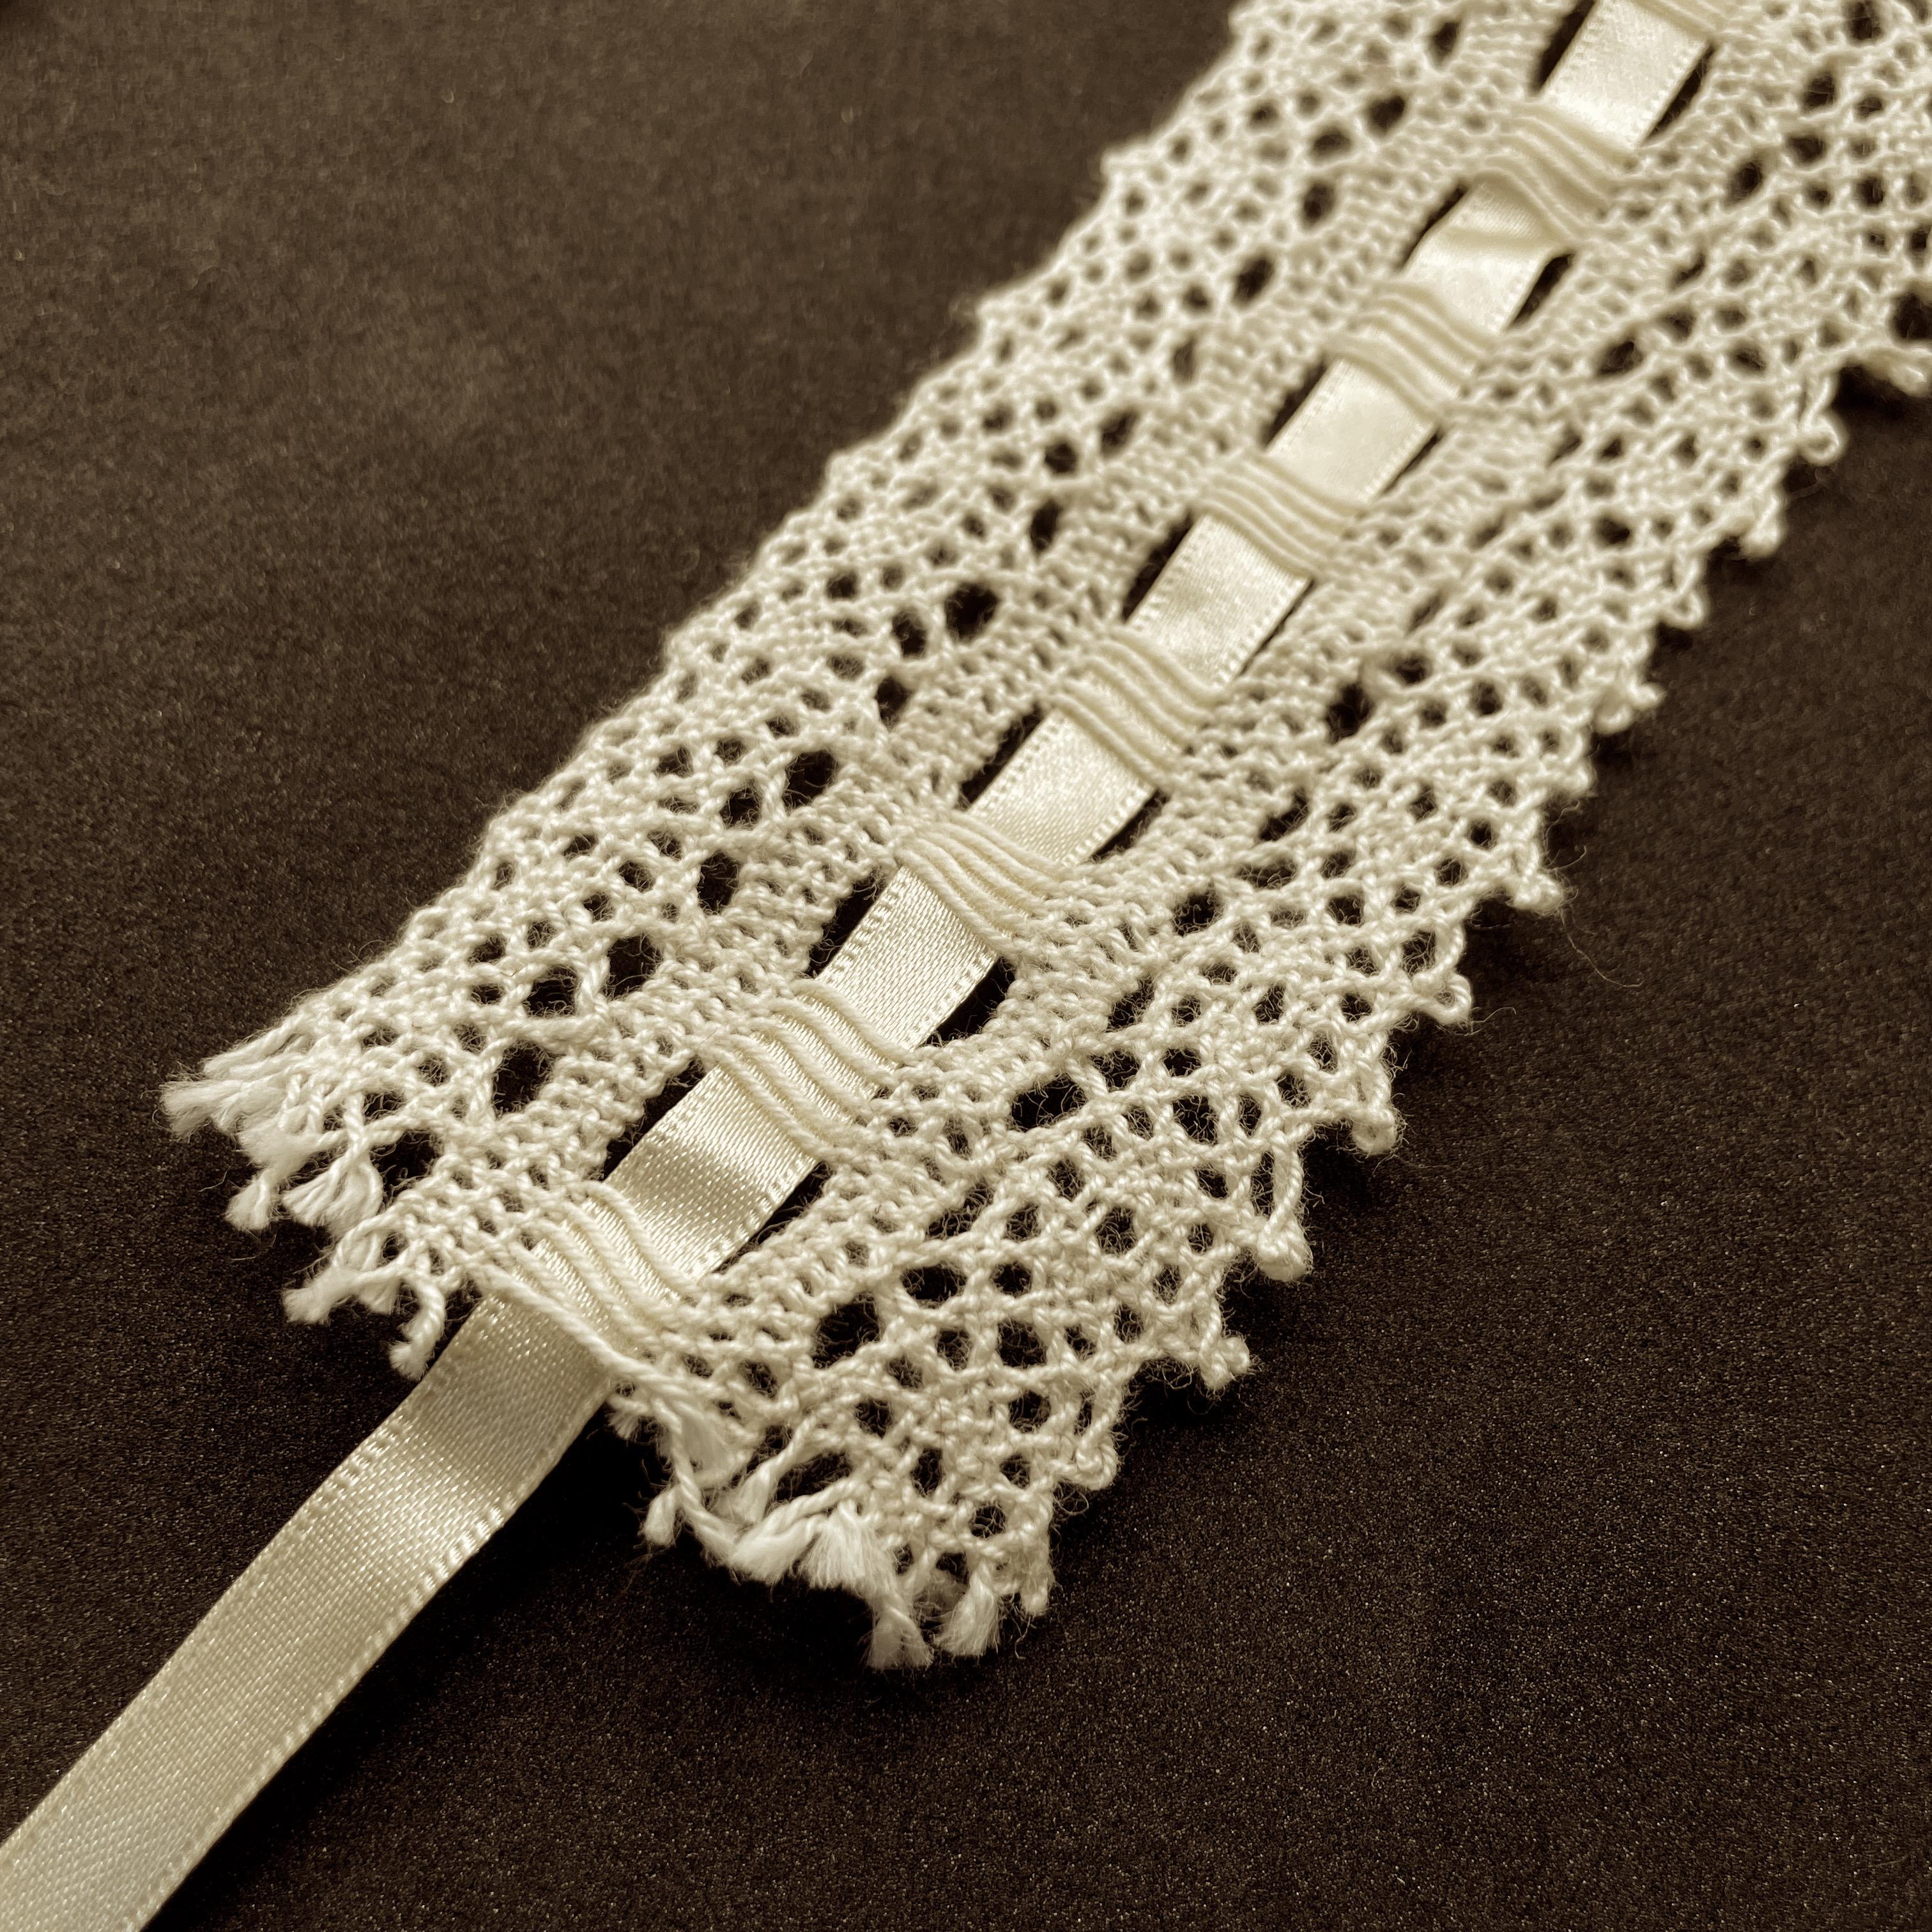 Eyelet Lace - Trim - English - 100% Cotton threaded with Centred 7mm ribbon  (695) - 42mm wide, per metre